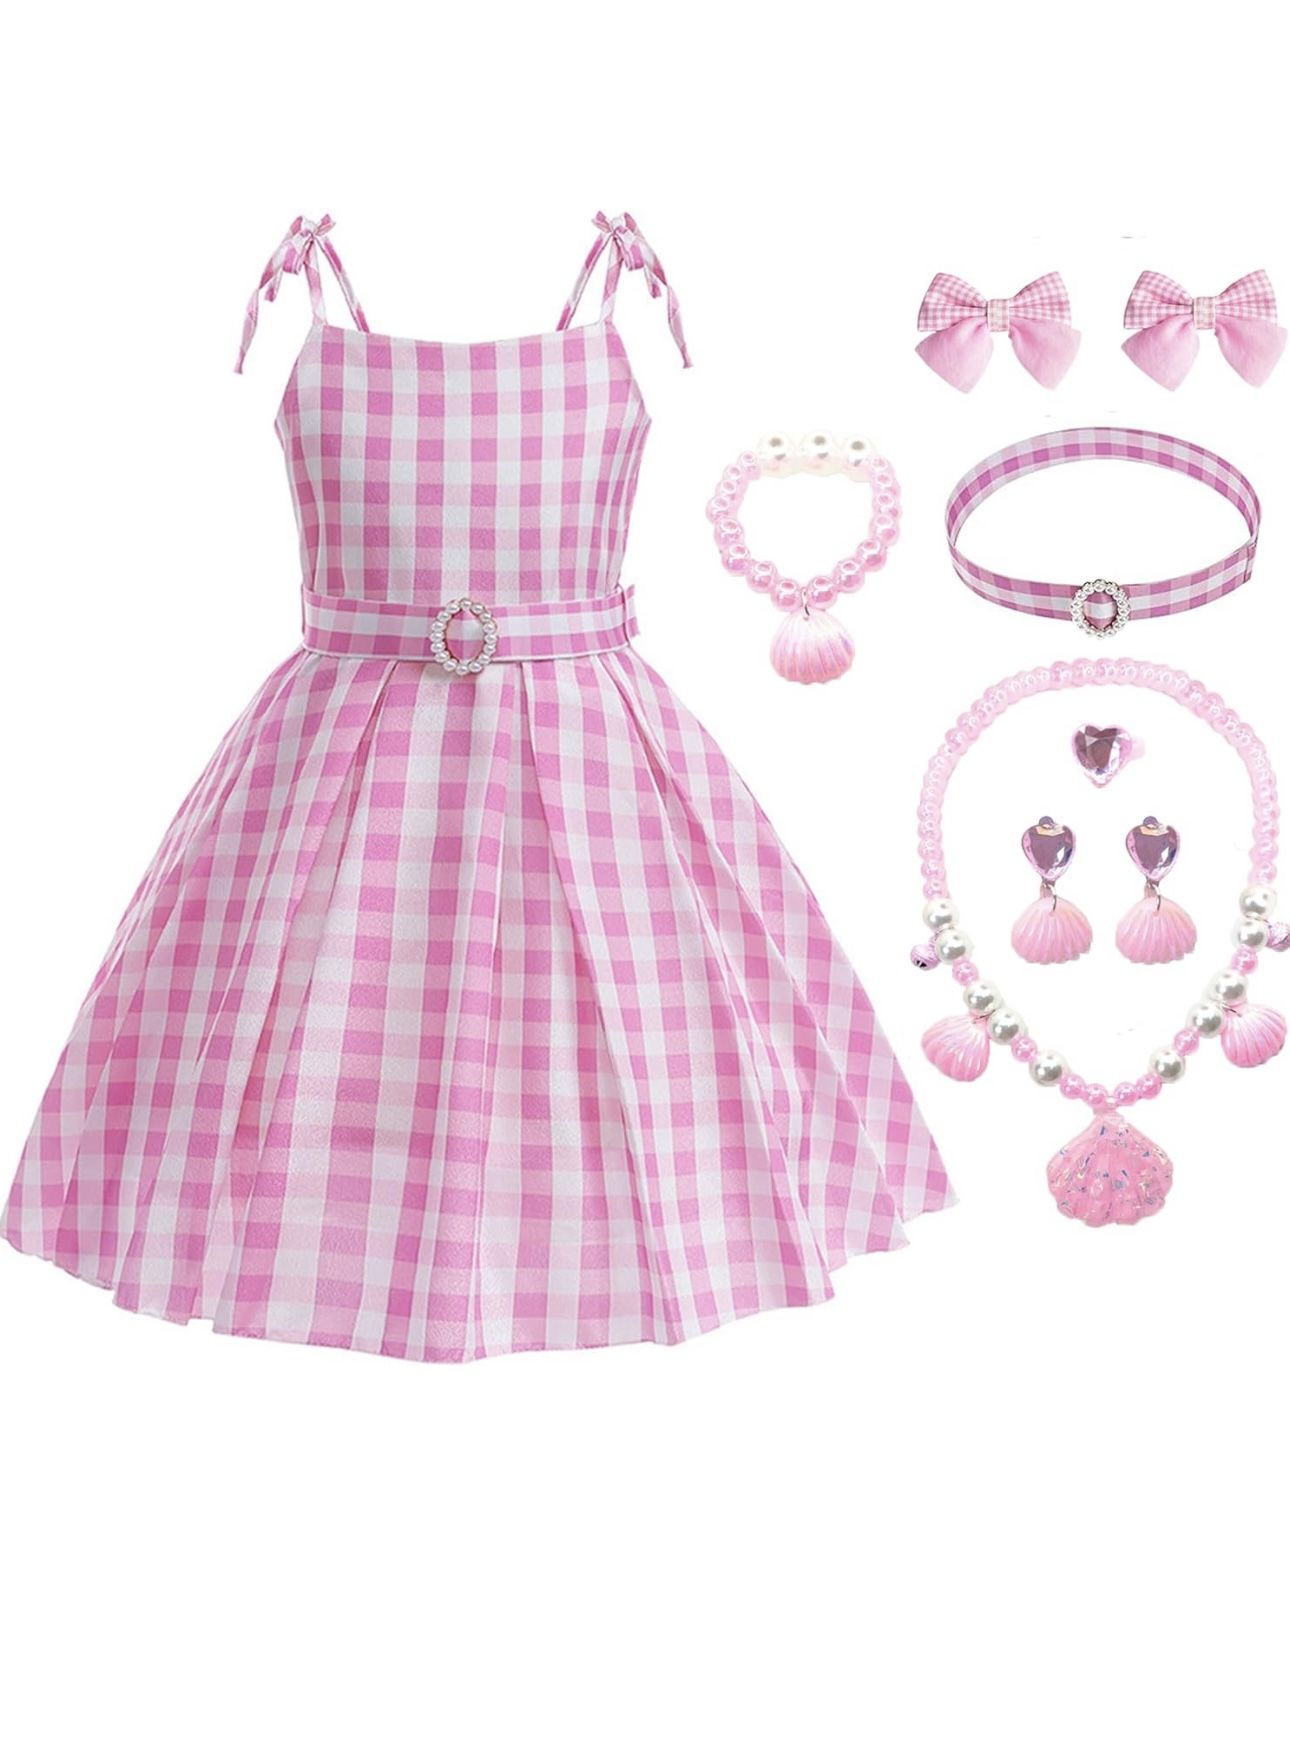 Girls Pink Costume Dress up Halloween Cosplay Birthday Party Outfits with Accessories